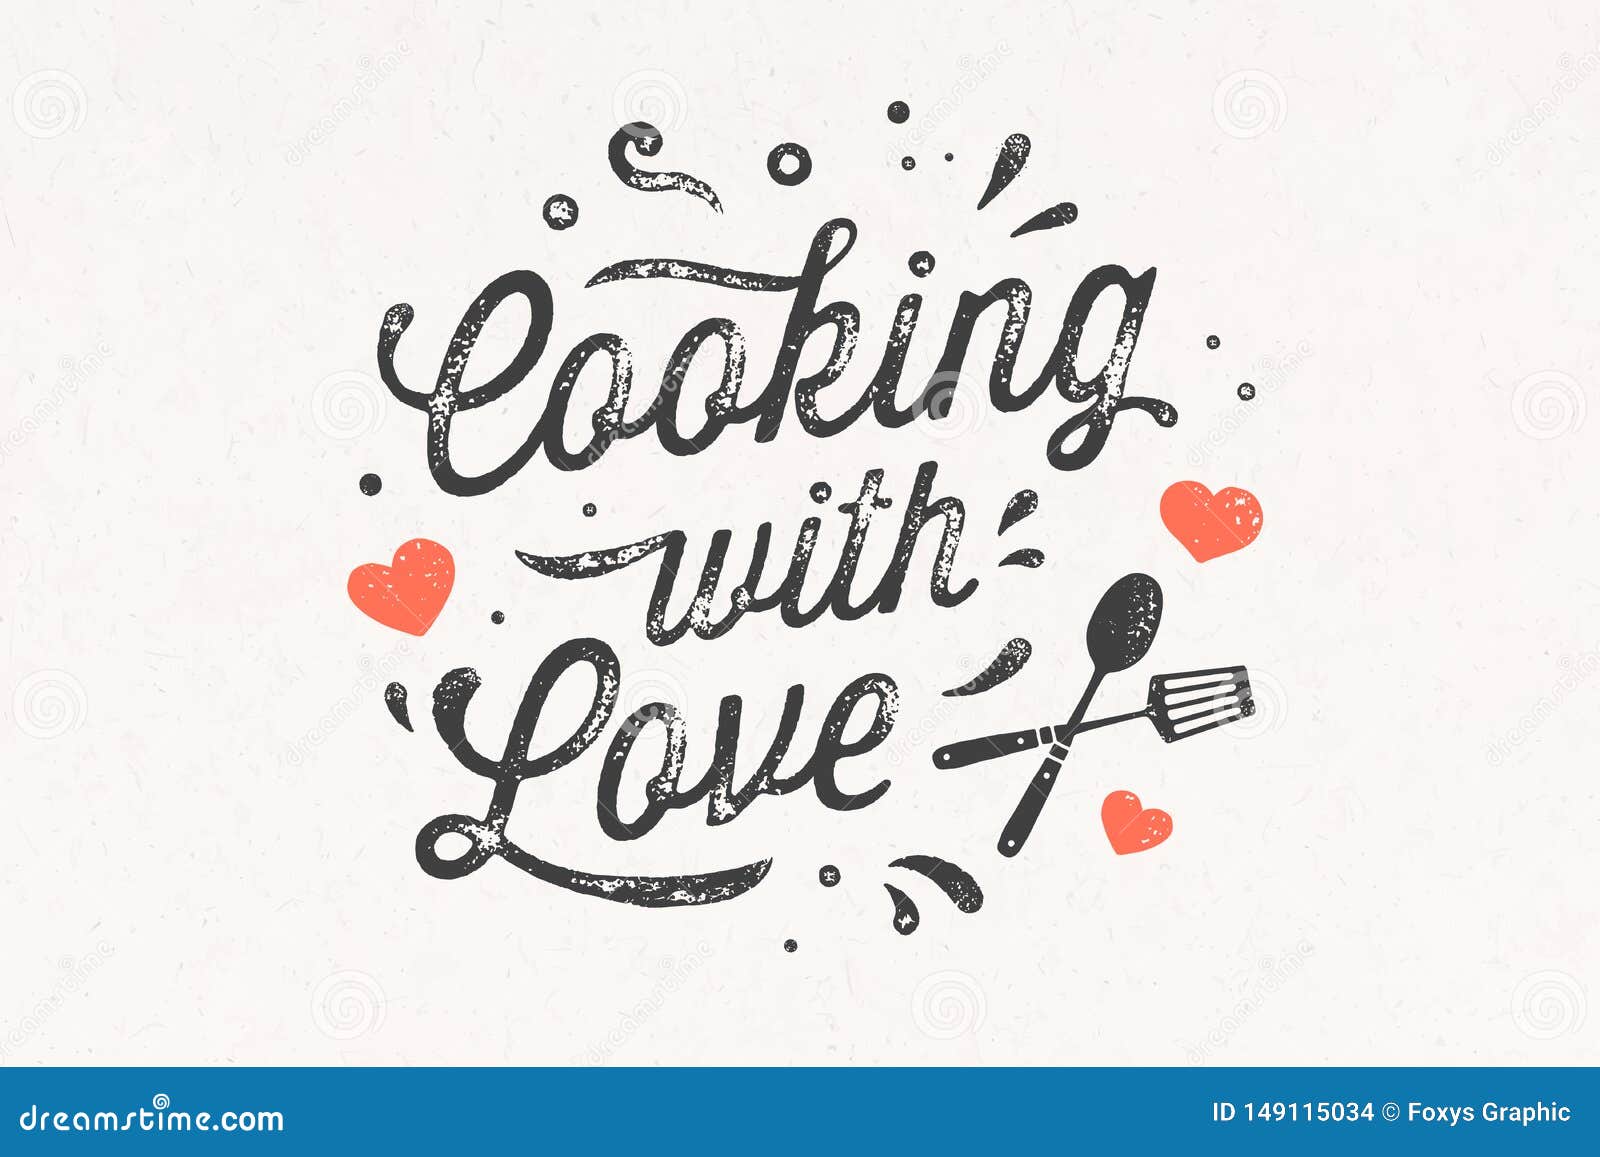 Cooking With Love. Kitchen Poster. Kitchen Wall Decor ...